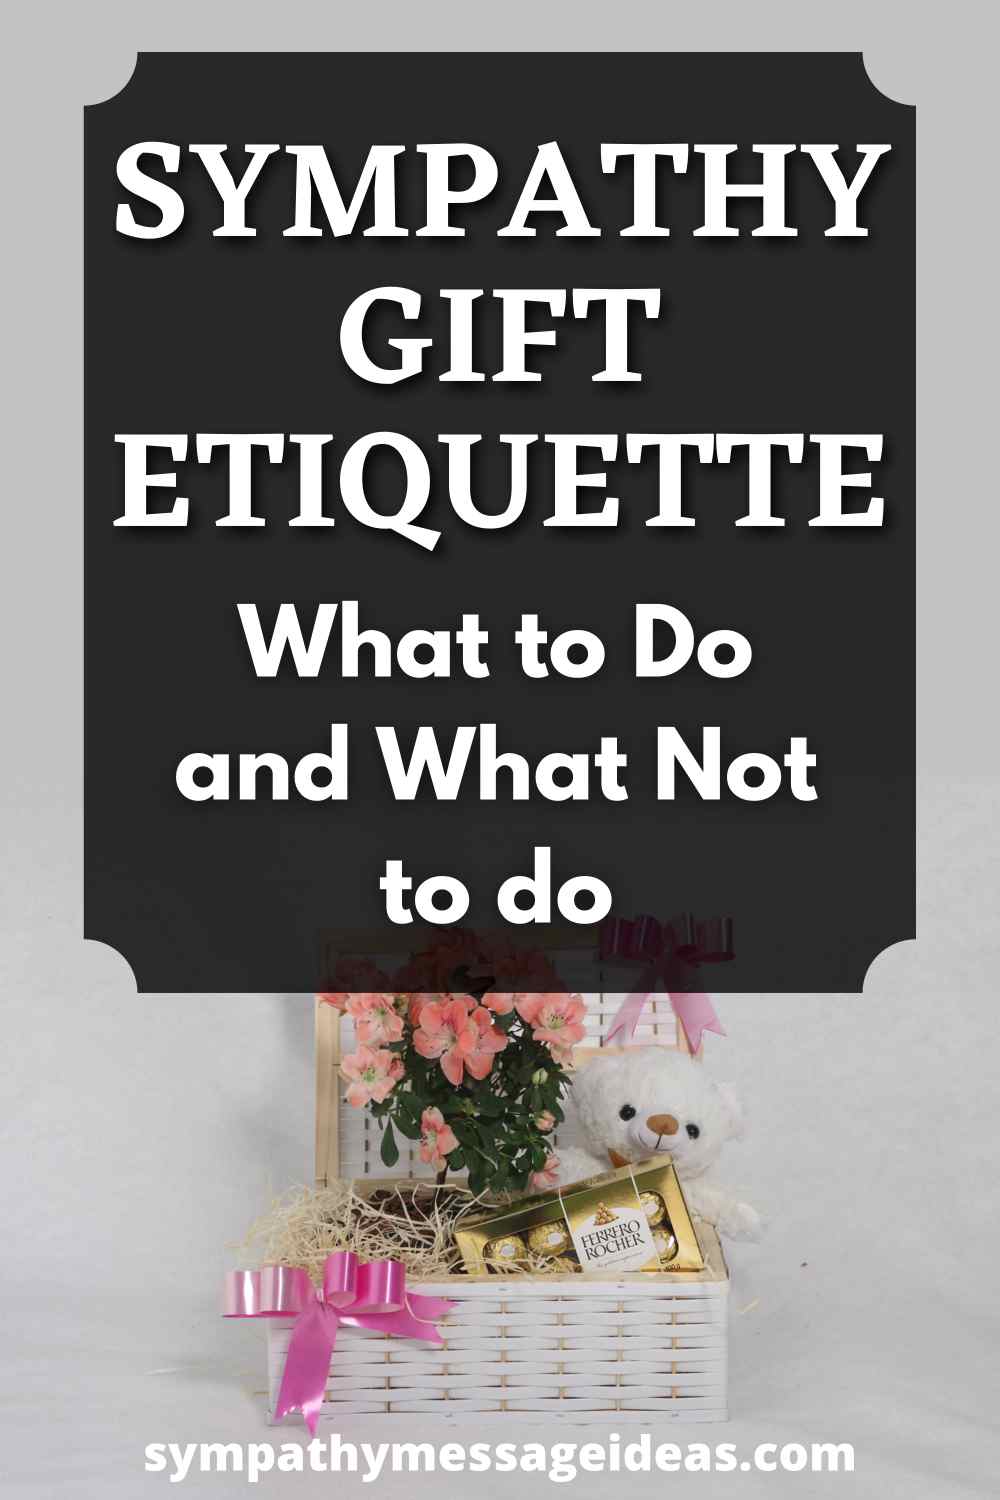 Sympathy Gift Etiquette: What to Do and What Not to do - Sympathy Card Messages